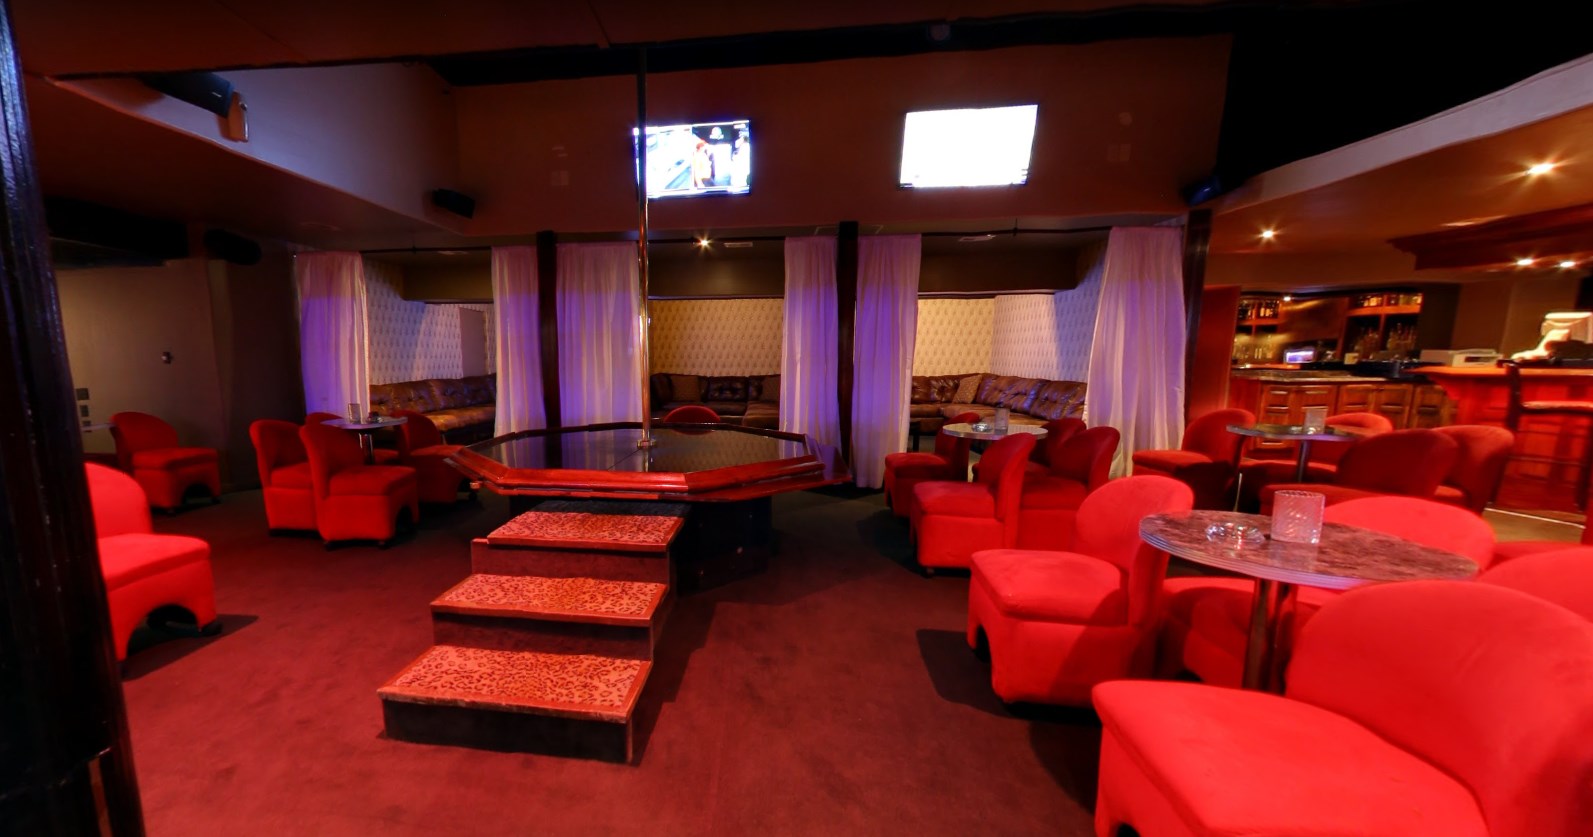 Thee Doll House - Myrtle Beach, Atlantic Beach and 3+ Best Nightclubs